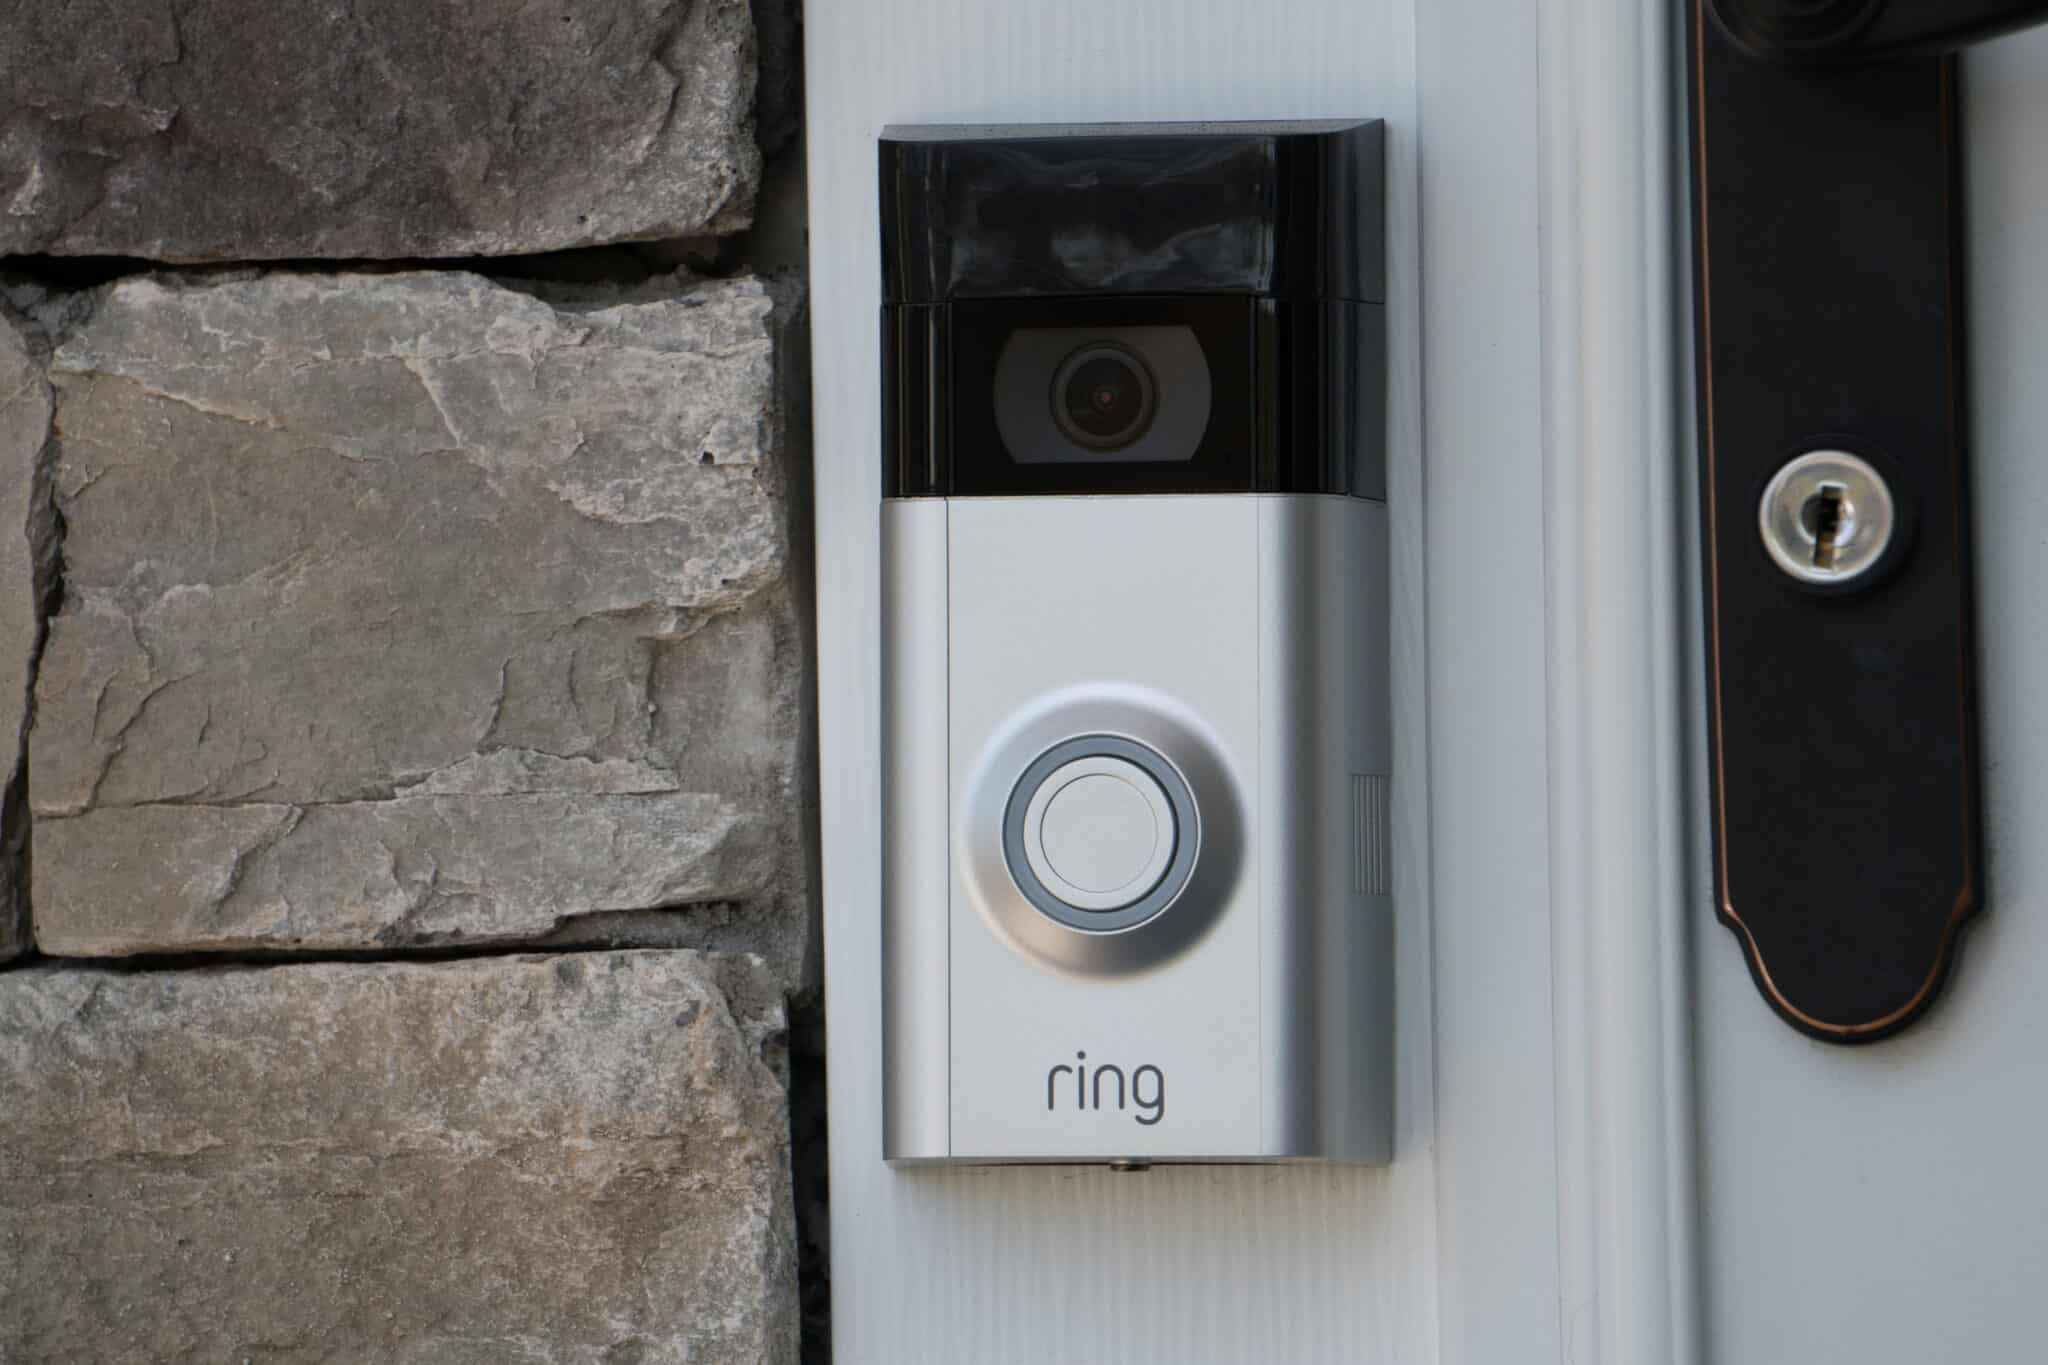 10 Reasons Not to Buy a Ring Video Doorbell Today - History-Computer